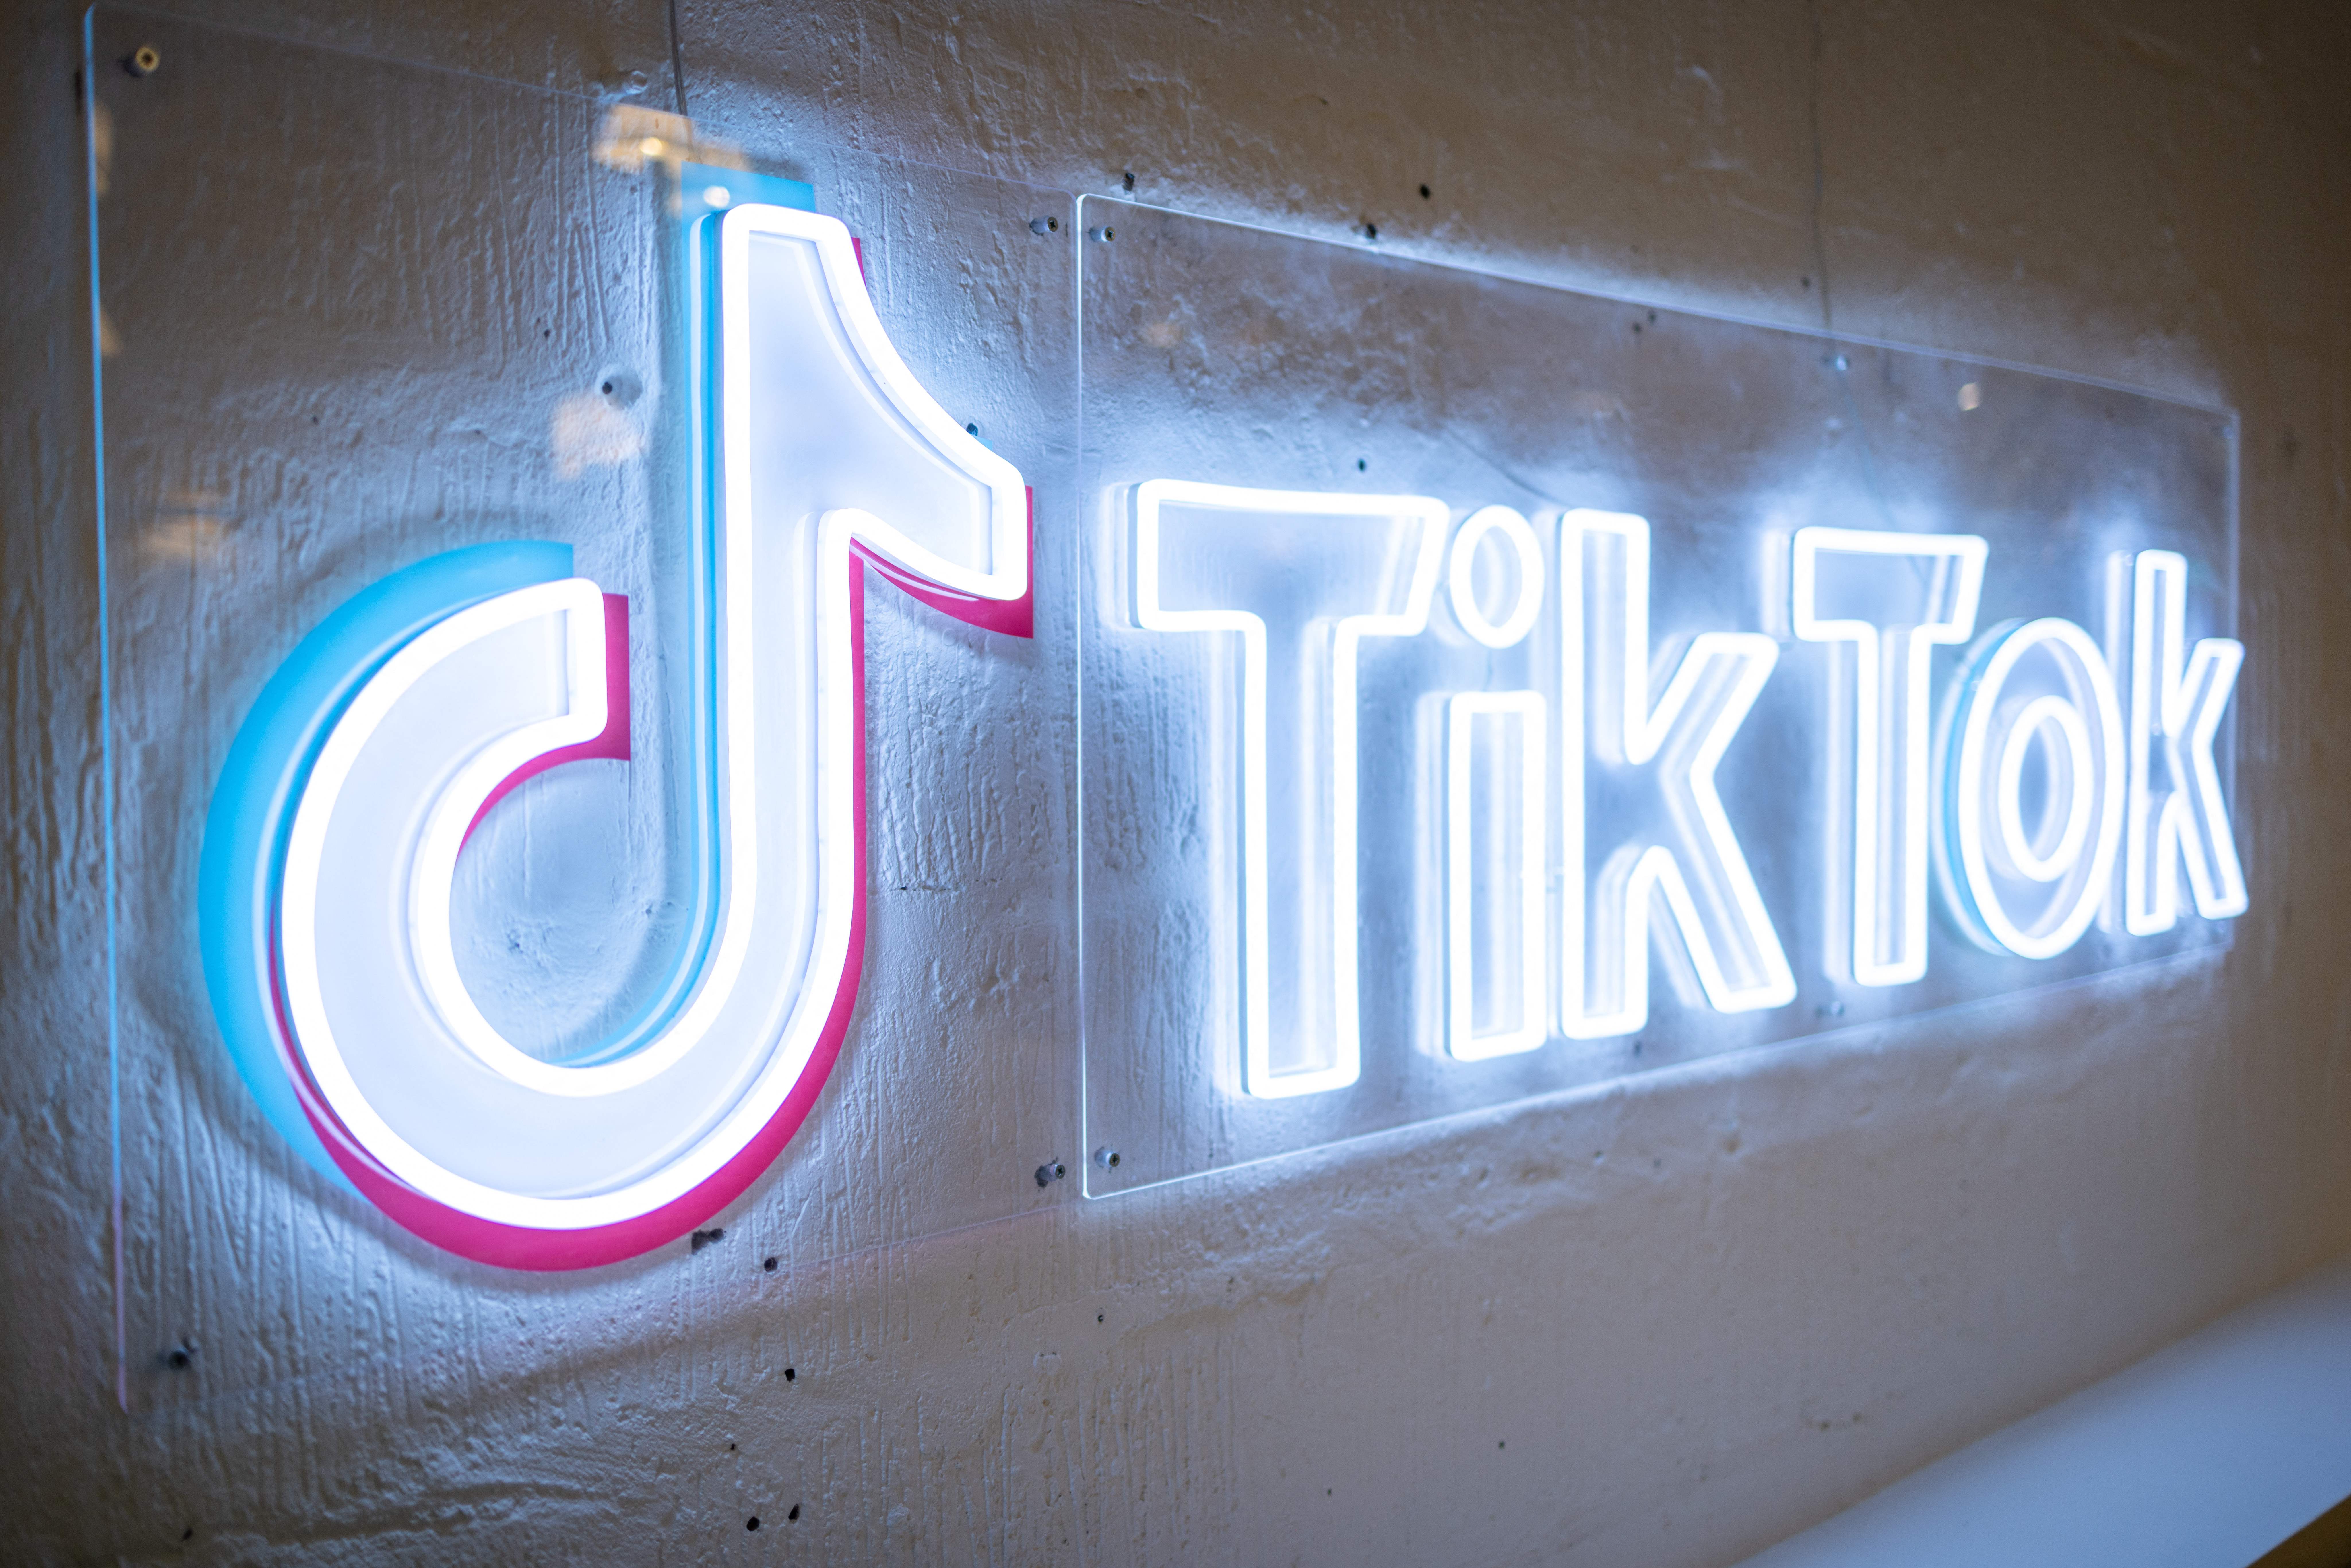 A photograph taken at the UK’s TikTok offices